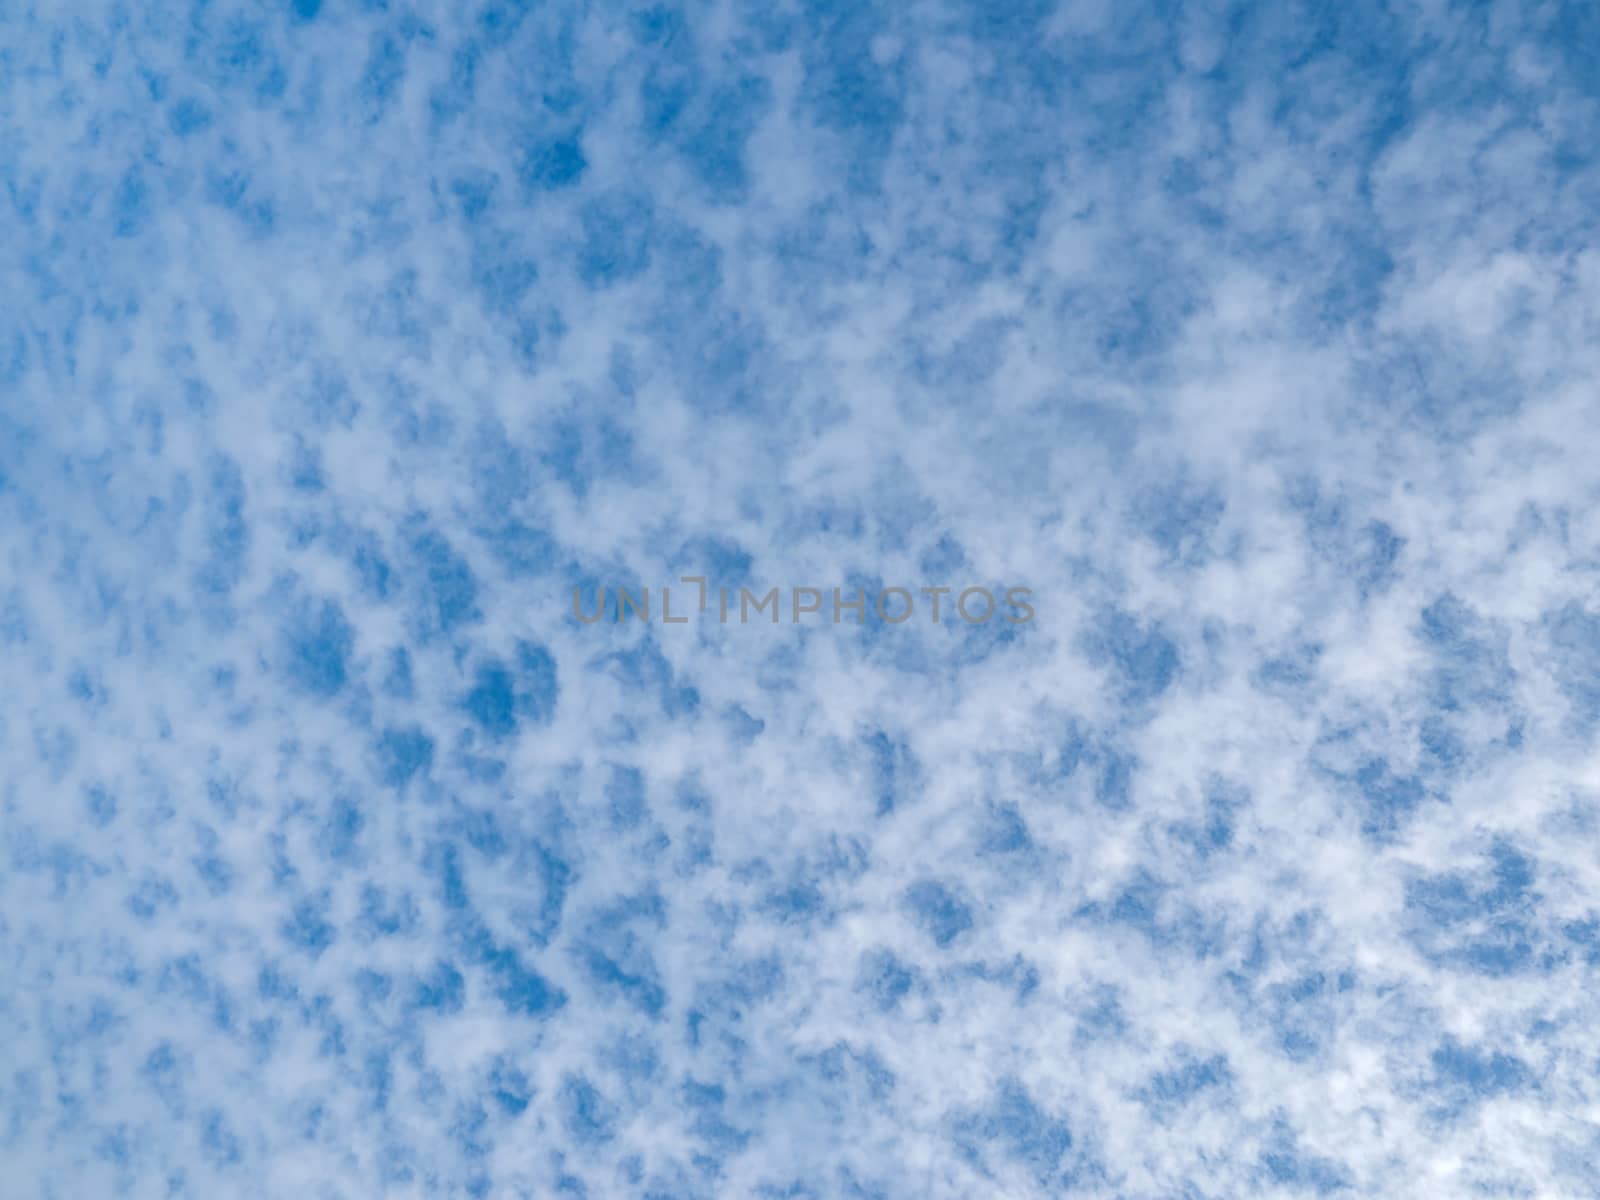 Lots of cloud dots on a partly cloudy blue sky by Arvebettum